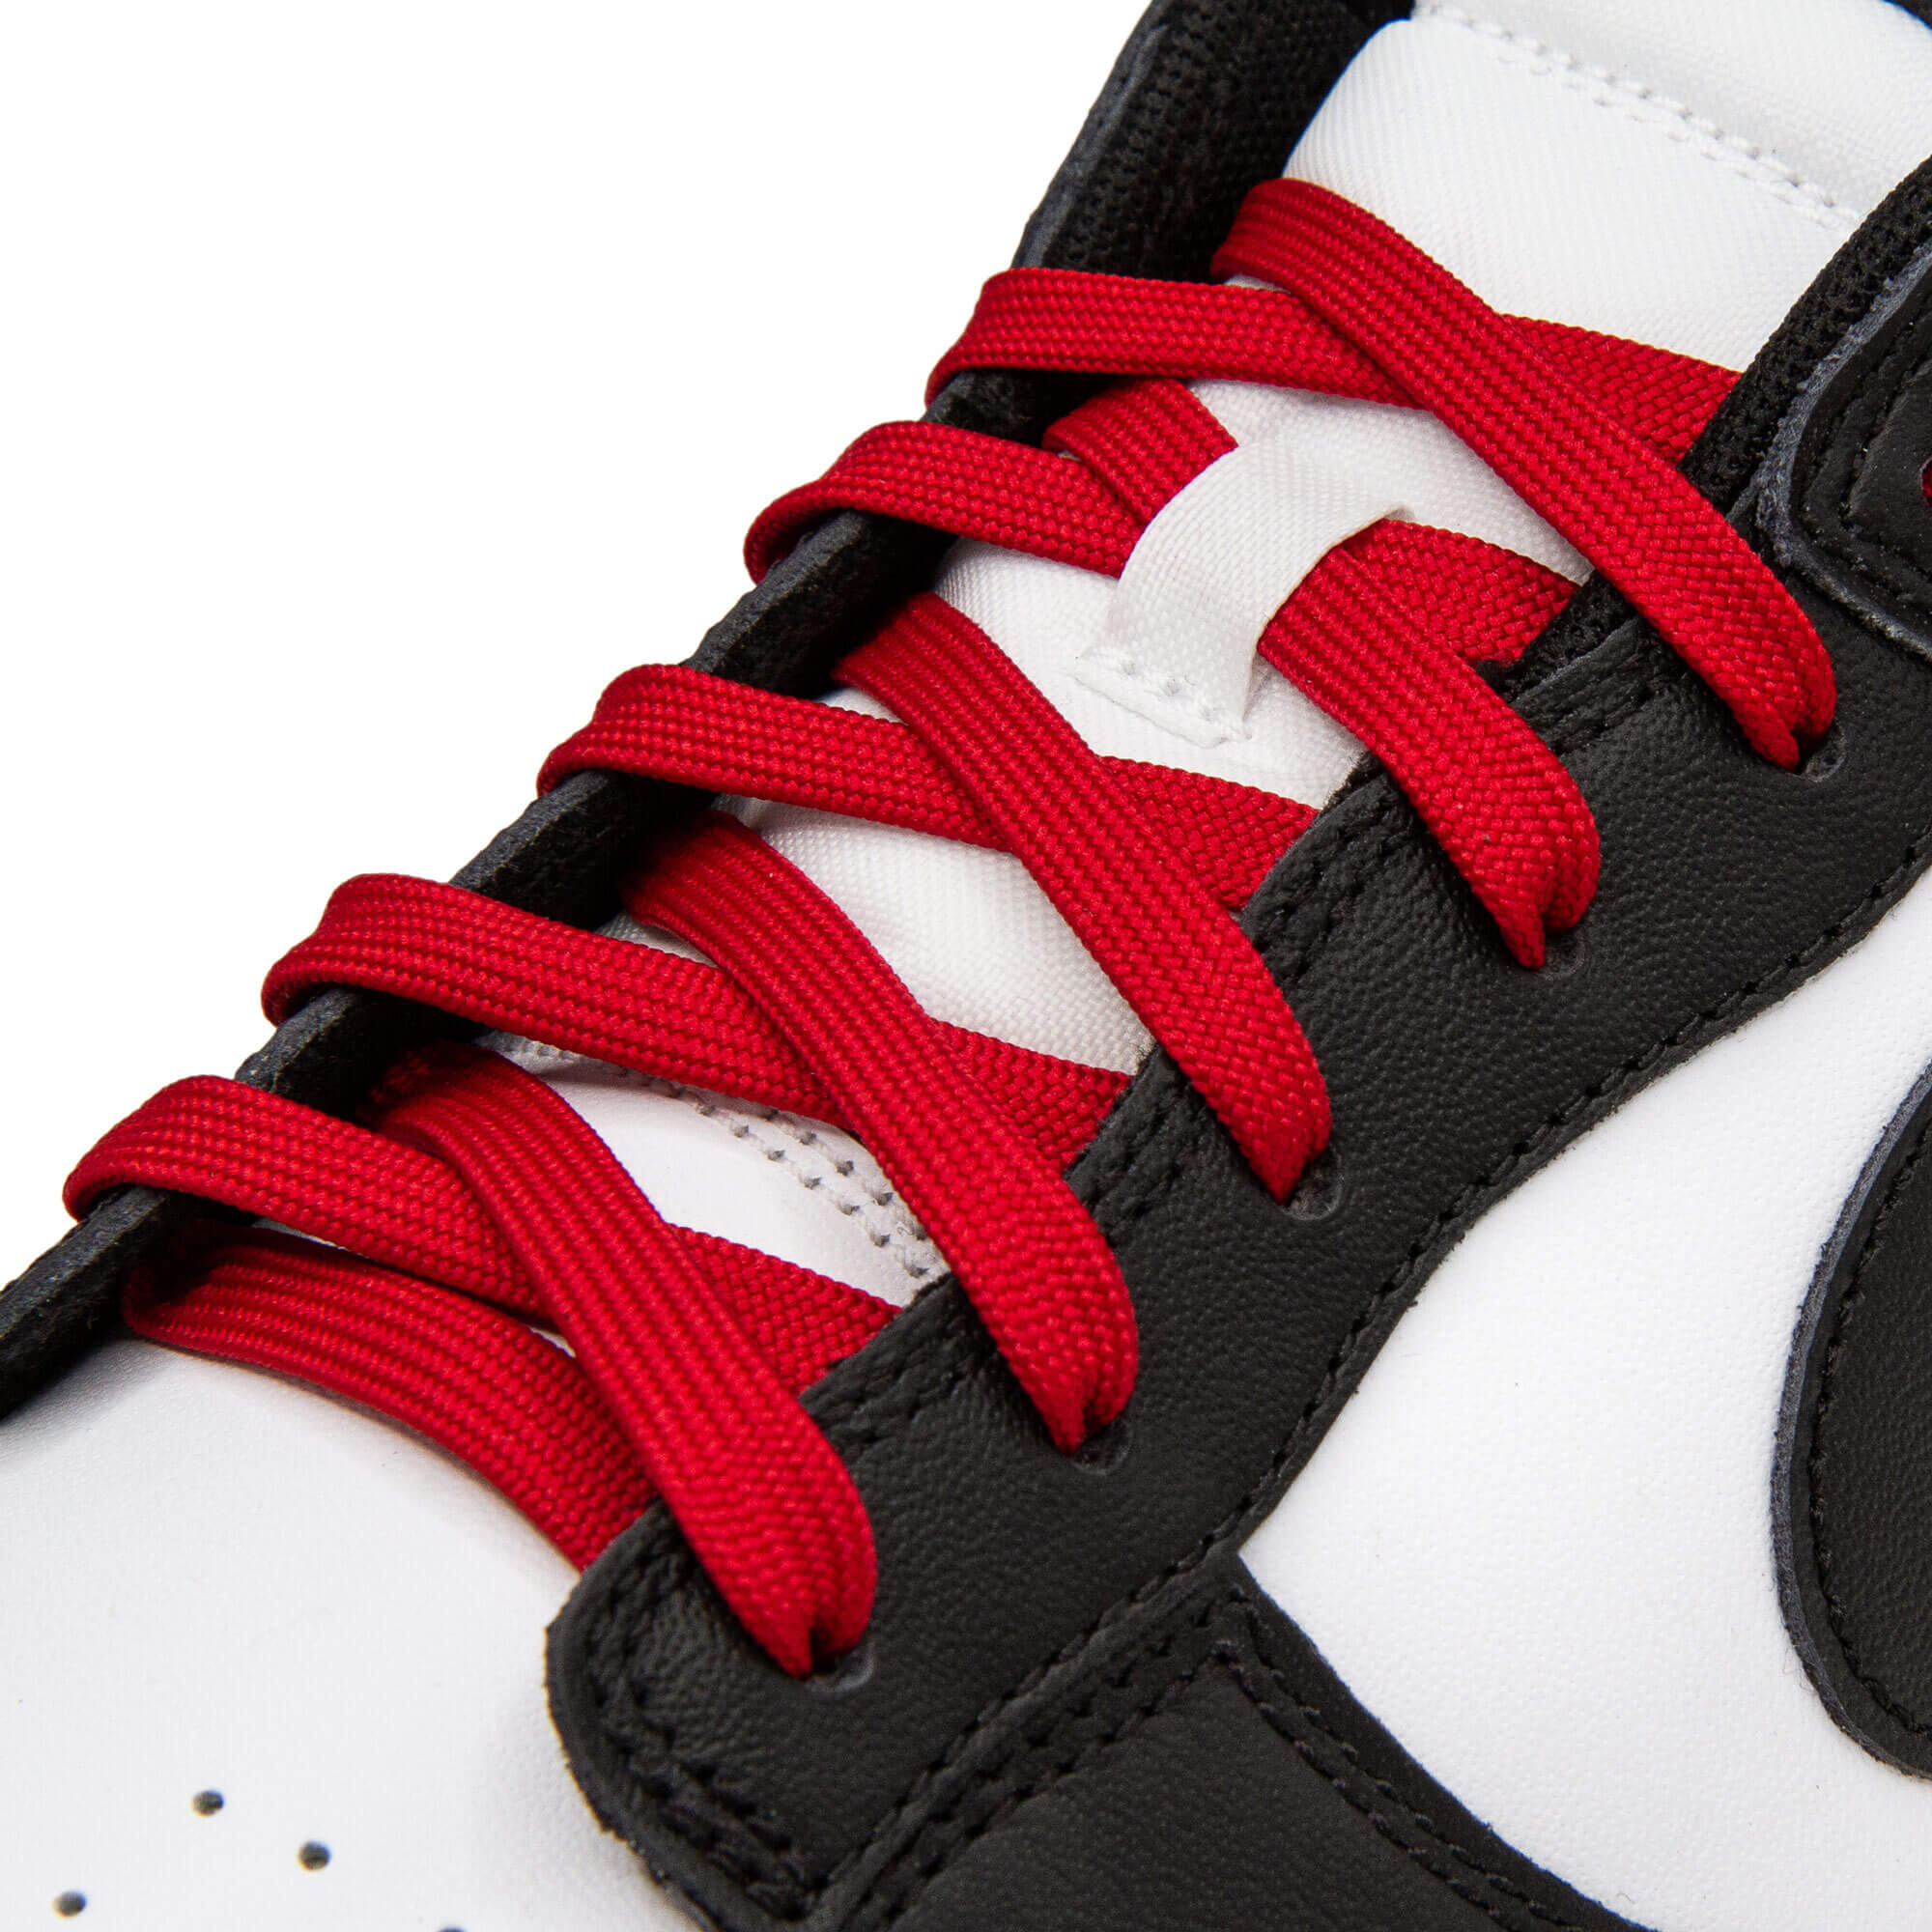 Discover 249+ red sneaker laces